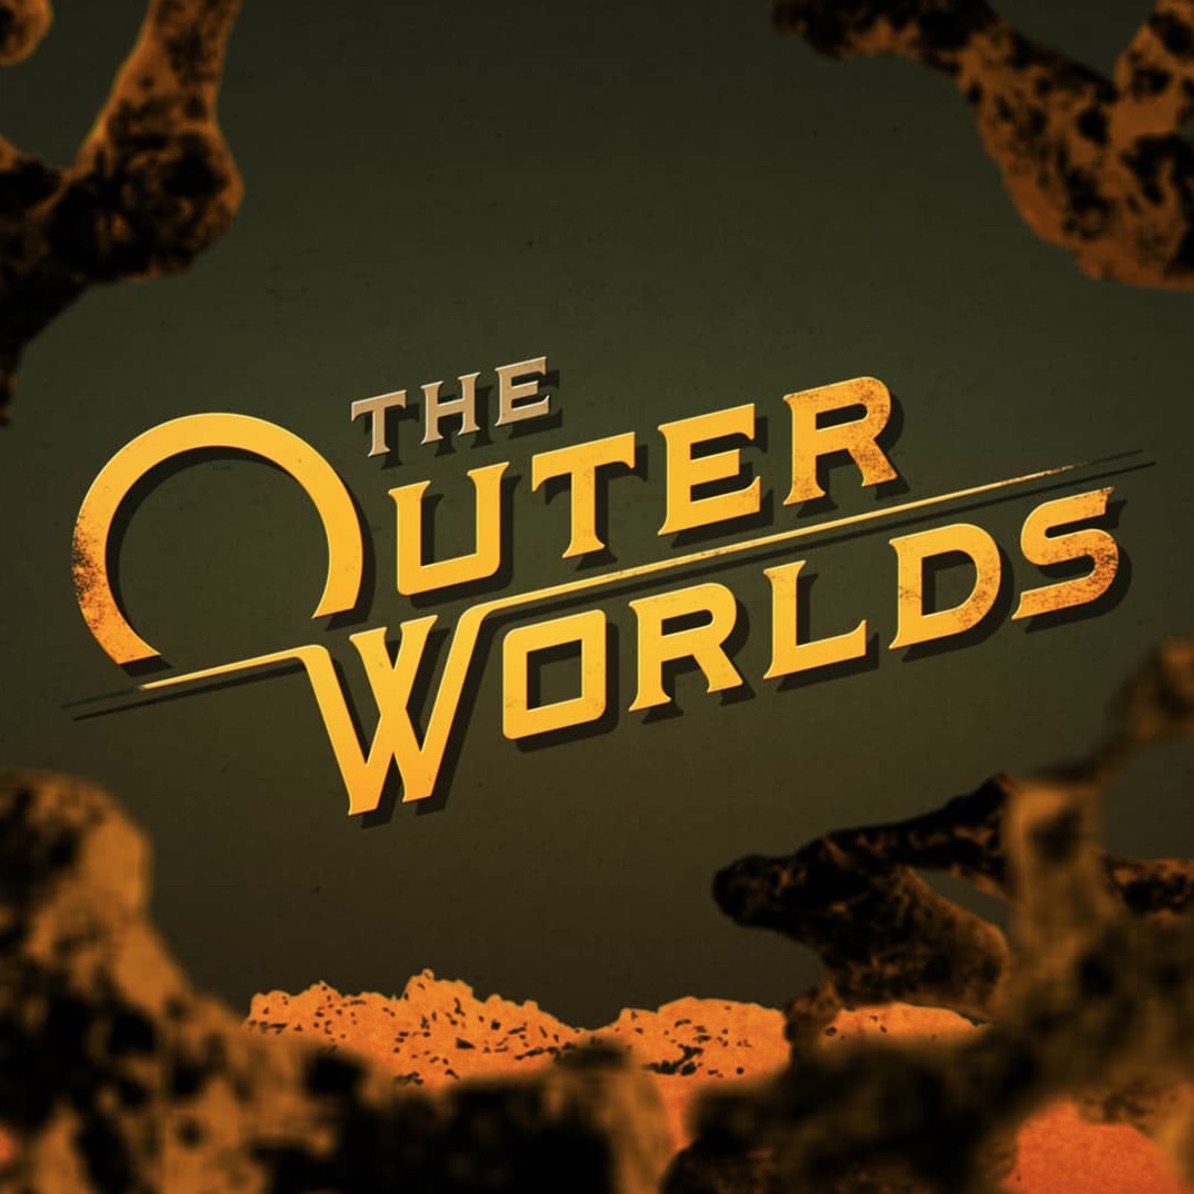 Read more about the article Outer Worlds Trailer – Over 4M Views!